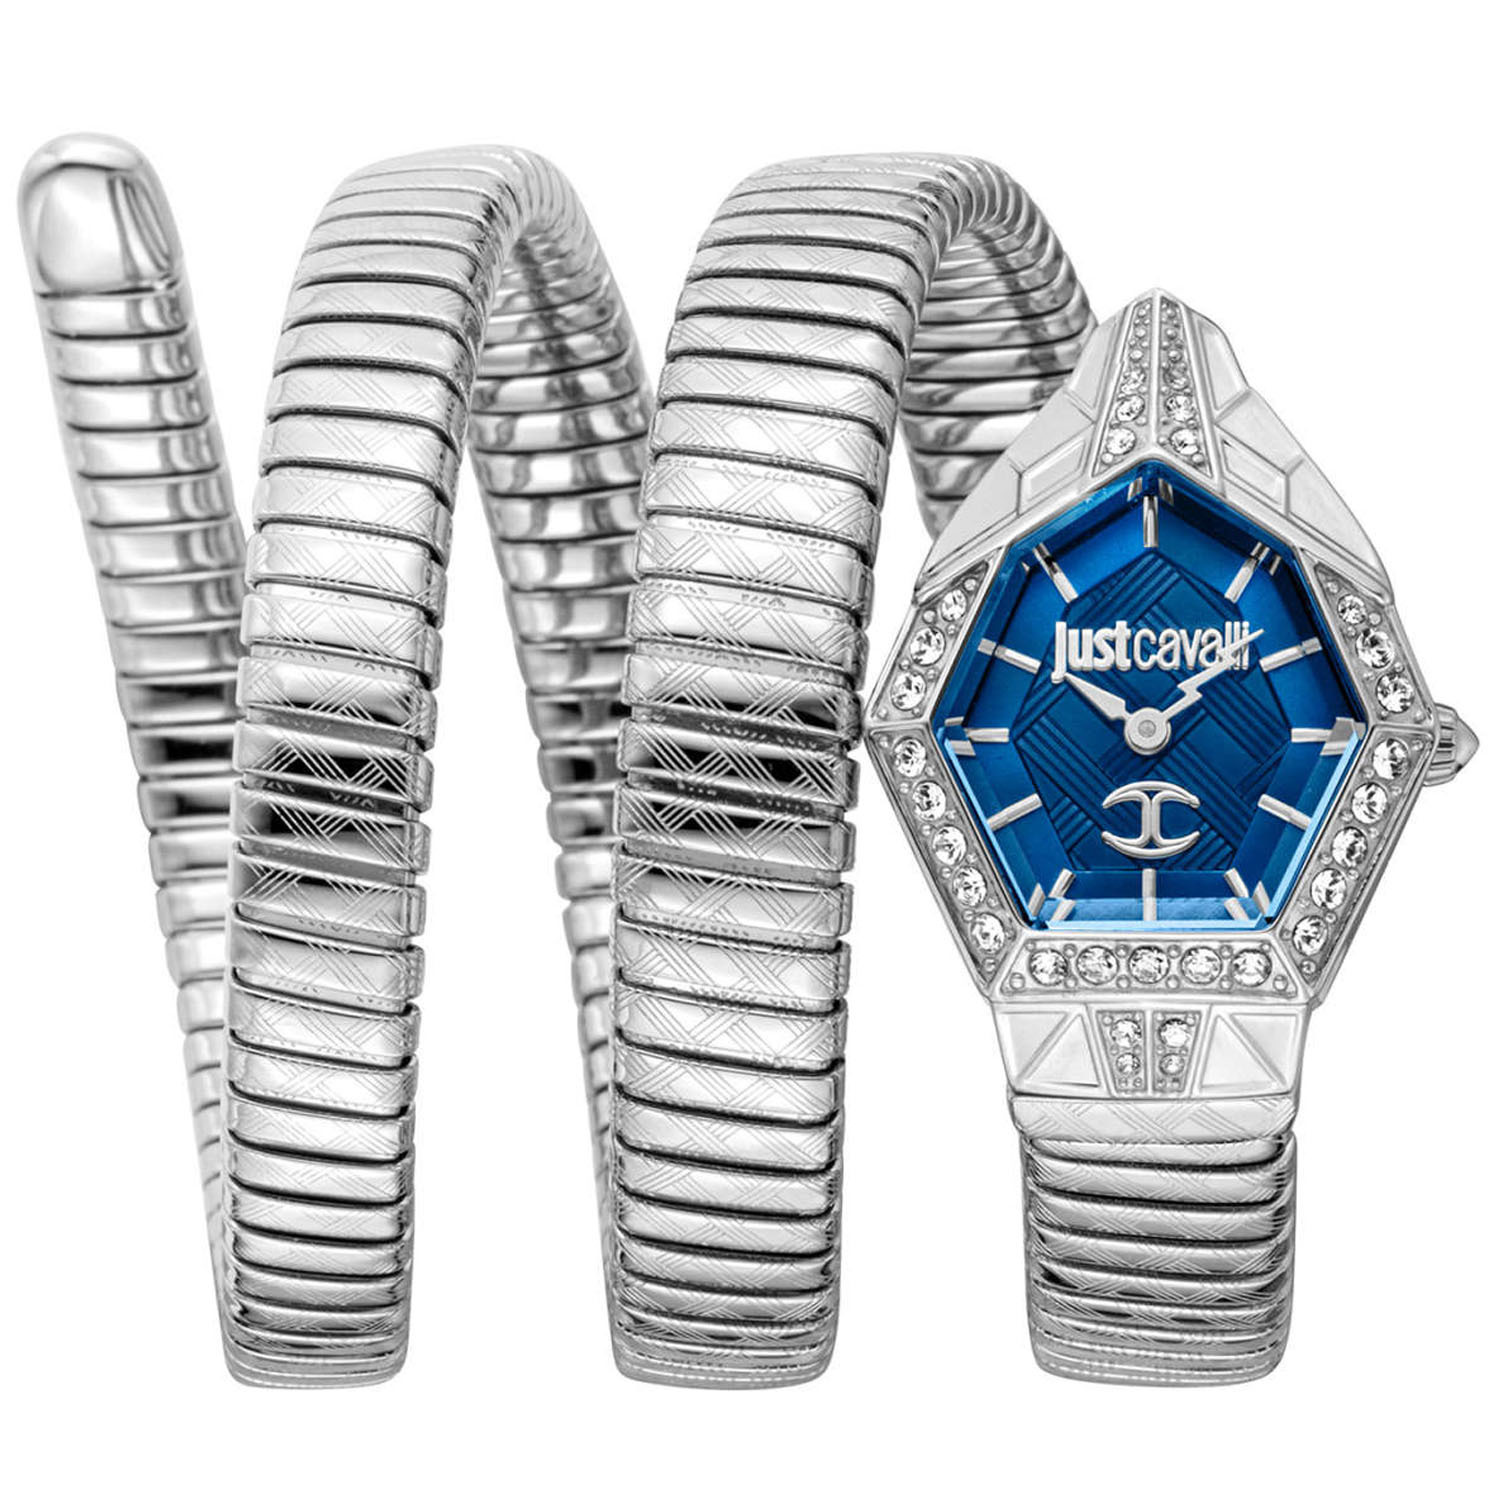 Primary image for Just Cavalli Women's Mesmerizing Blue Dial Watch - JC1L304M0015